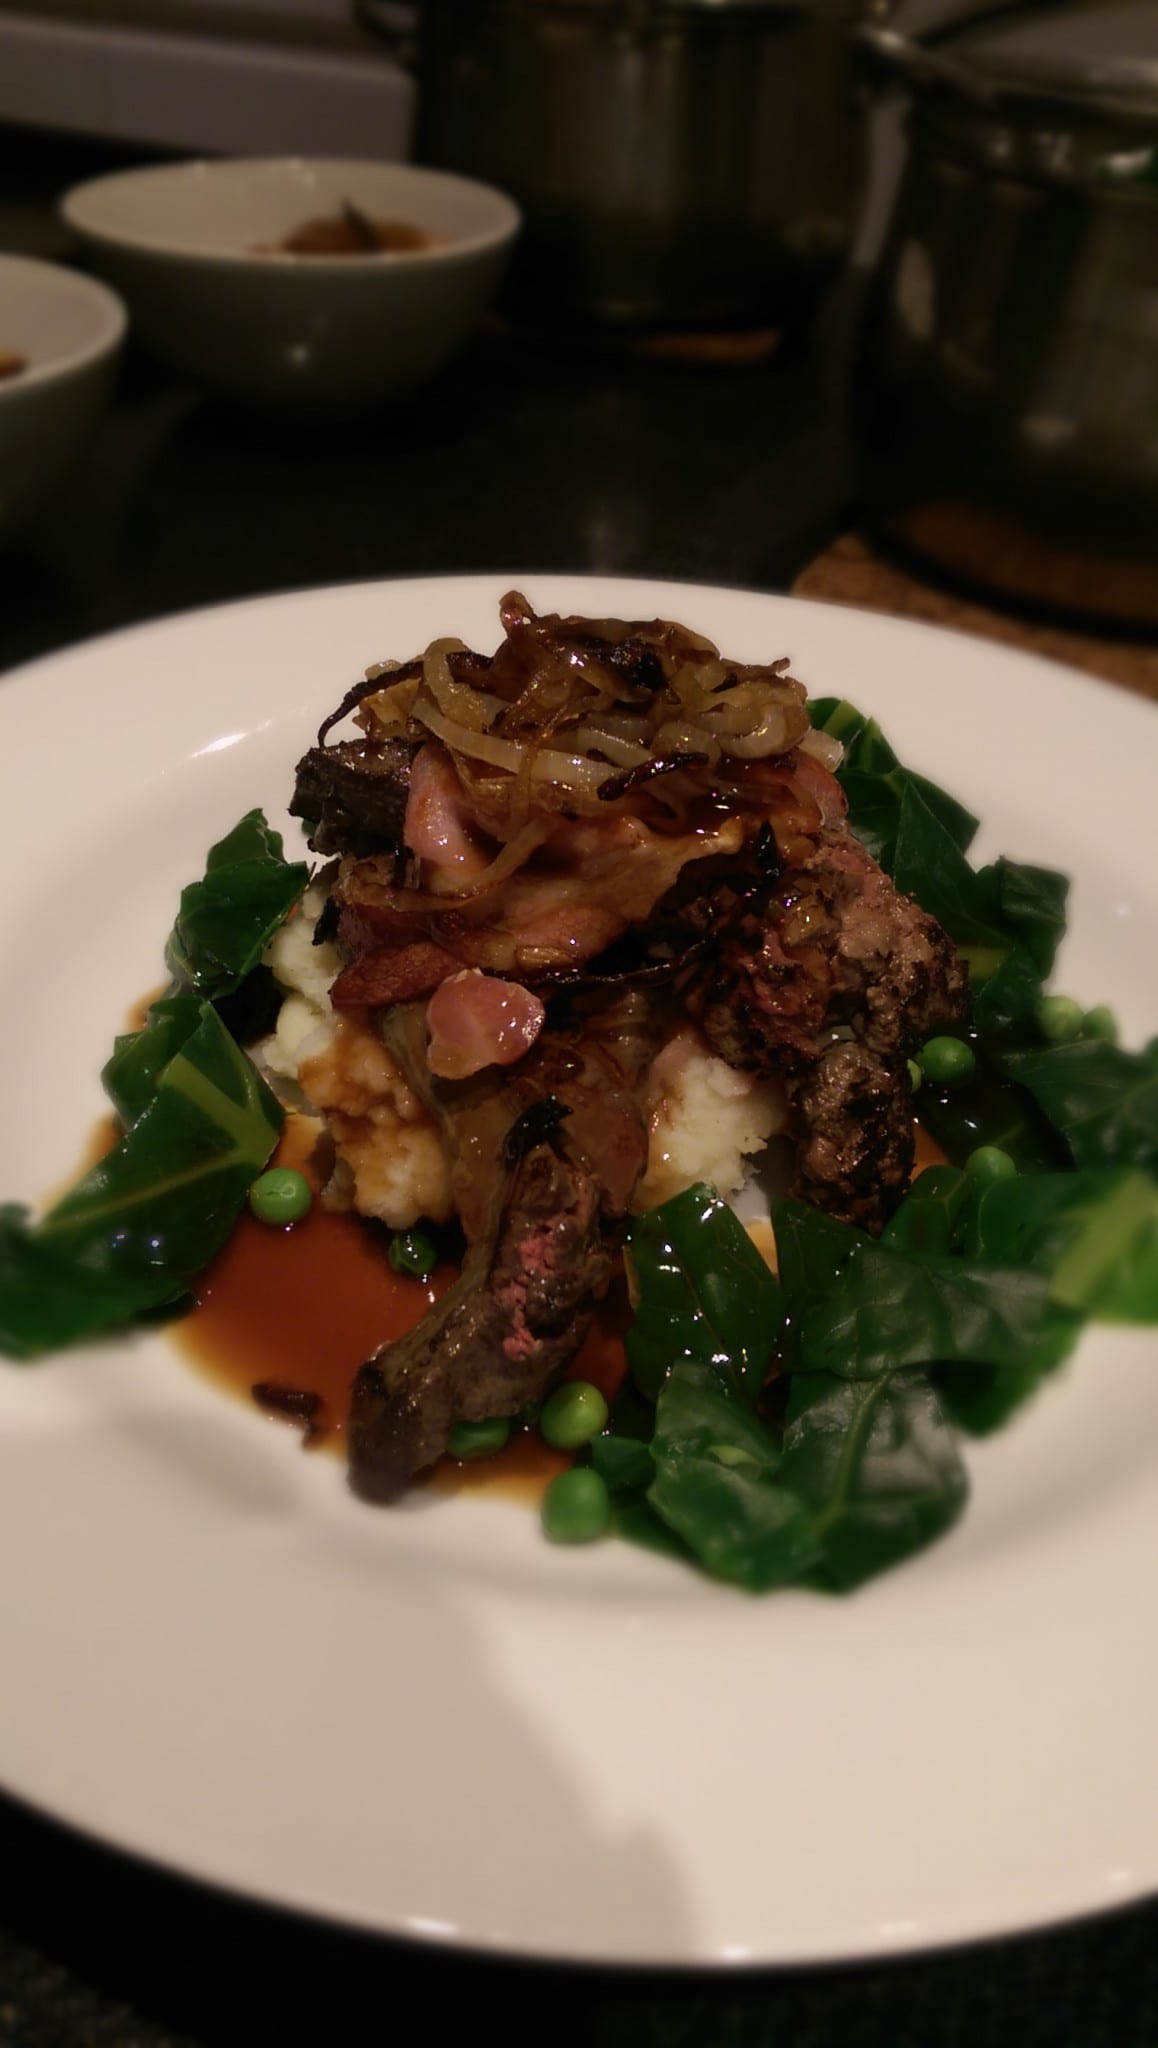 Liver, bacon and mash with spring greens and gravy